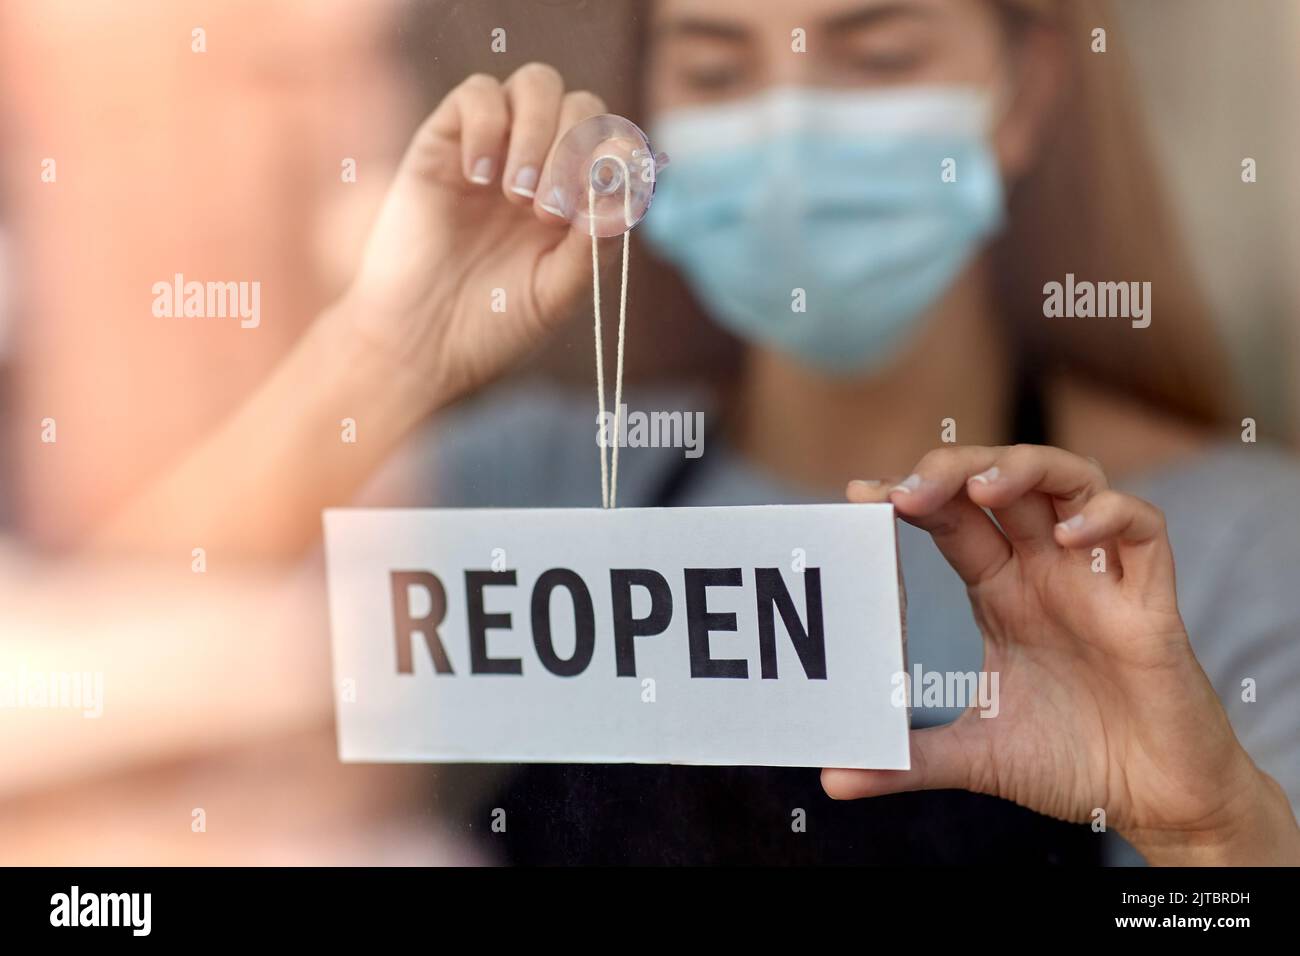 woman in mask with reopen banner on door glass Stock Photo